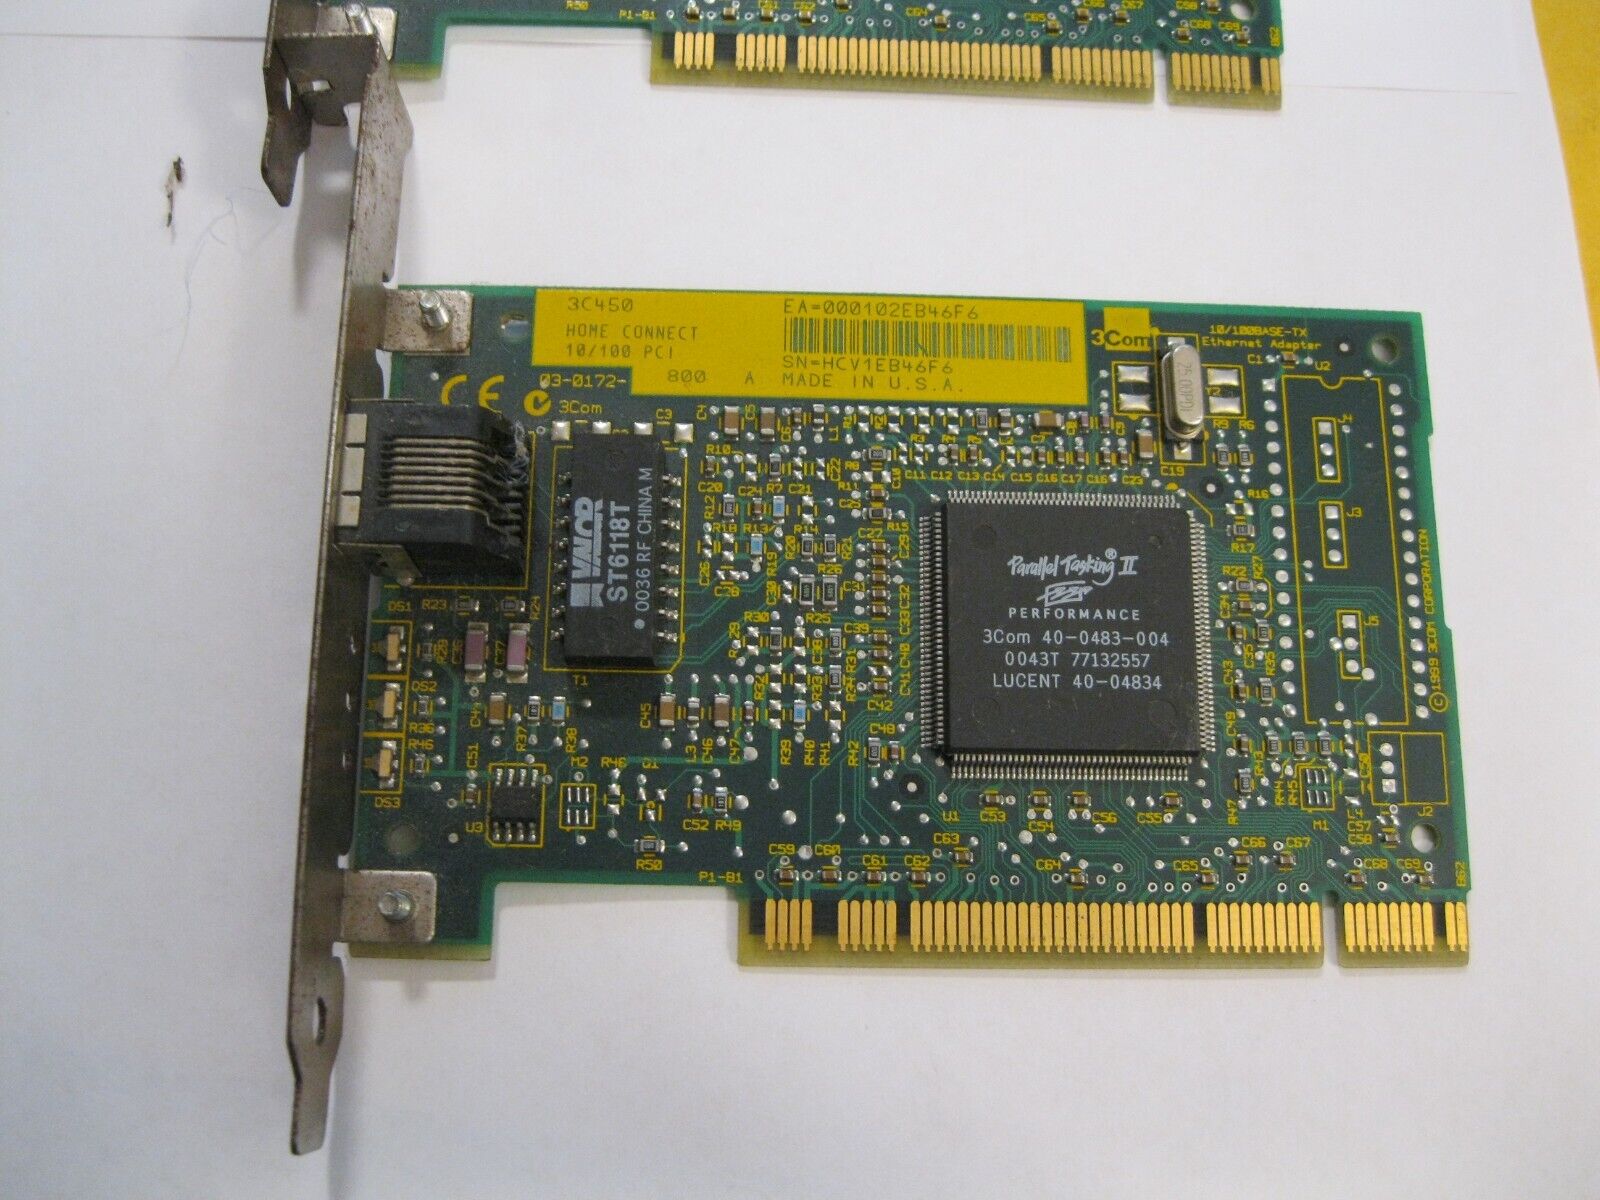 3Com Home Connect 3C450, PCI 10/100 Fast Ethernet Adapter 02-0172-004  REV A